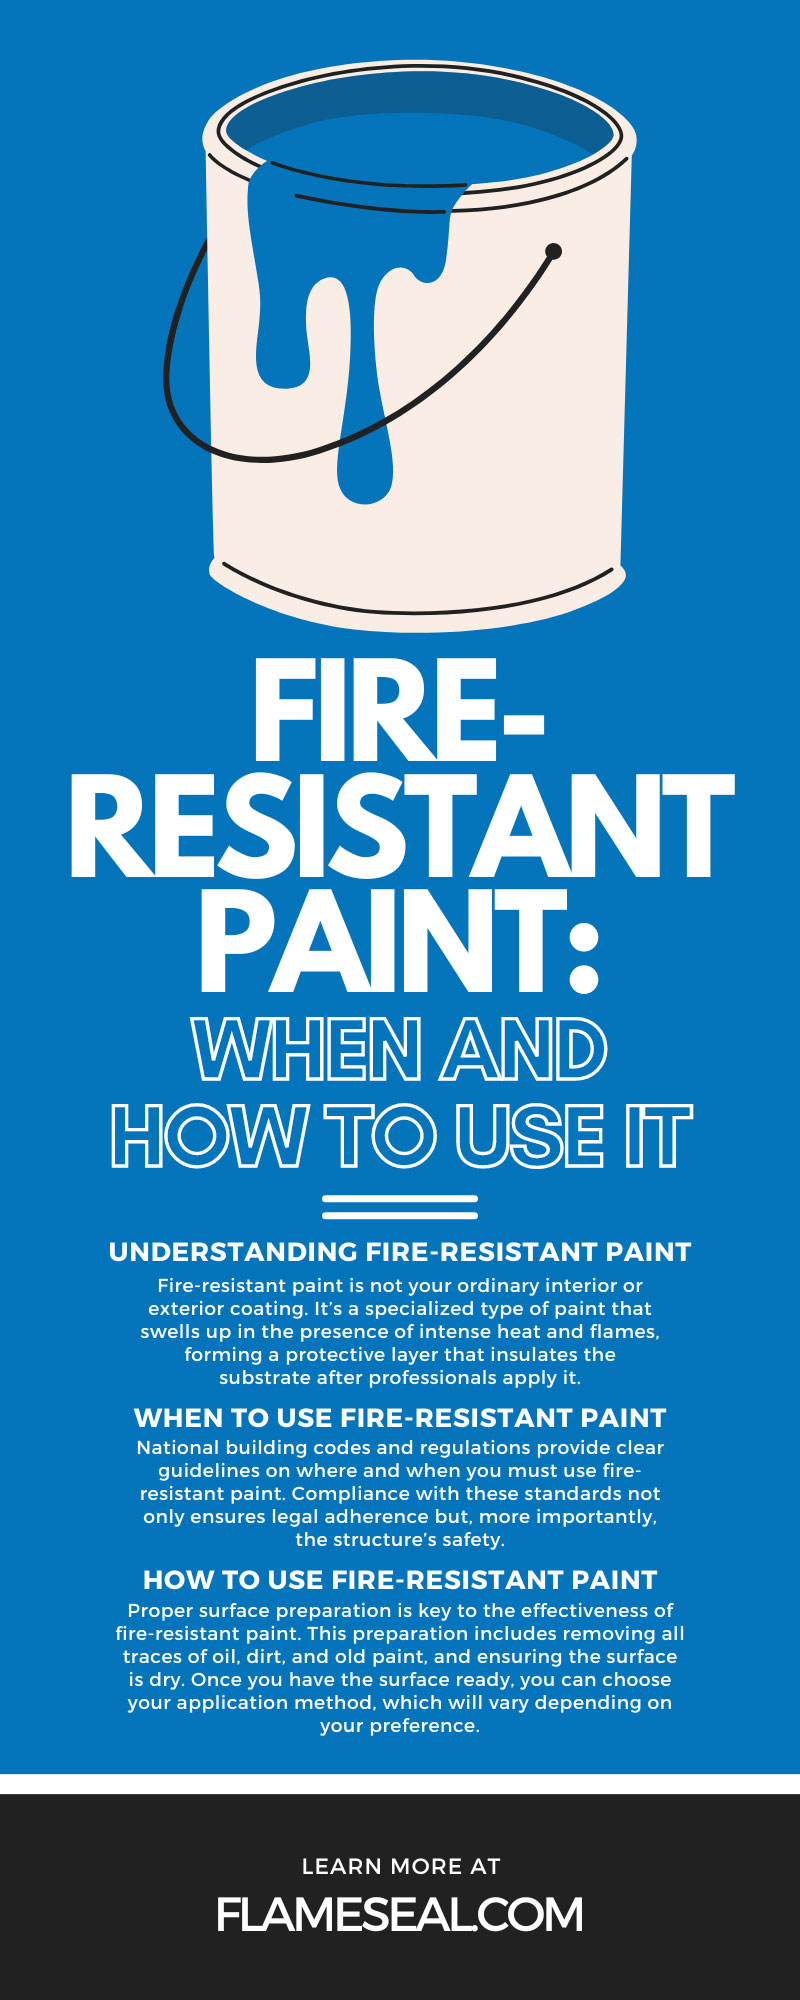 Fire-Resistant Paint: When and How To Use It